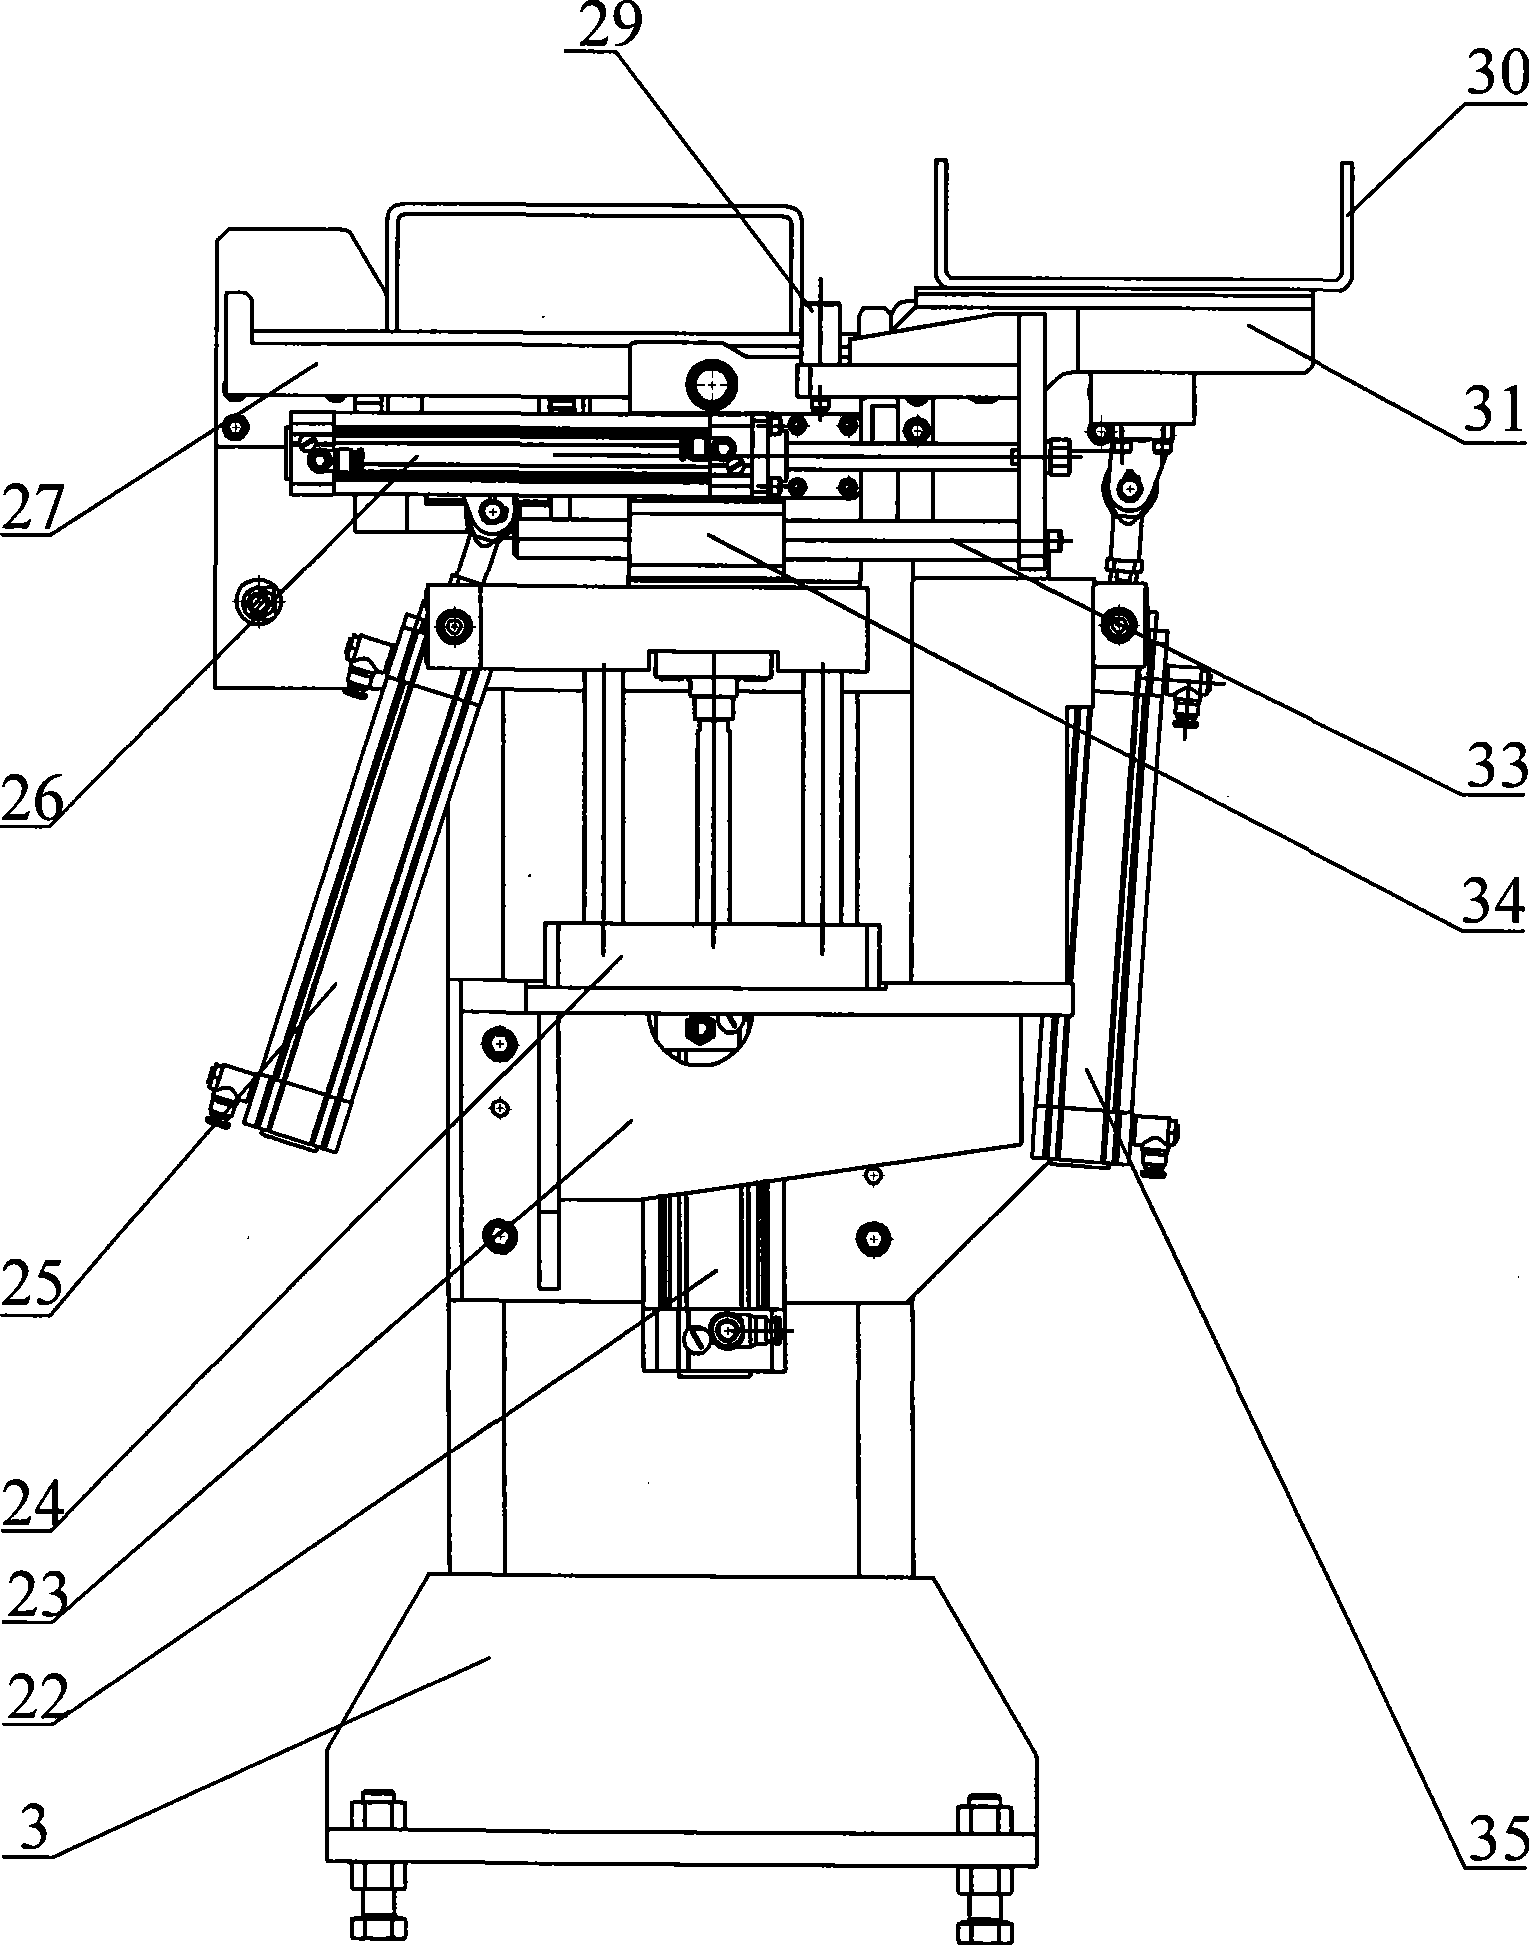 U shaped beam three-face punching technique and production device using the technique